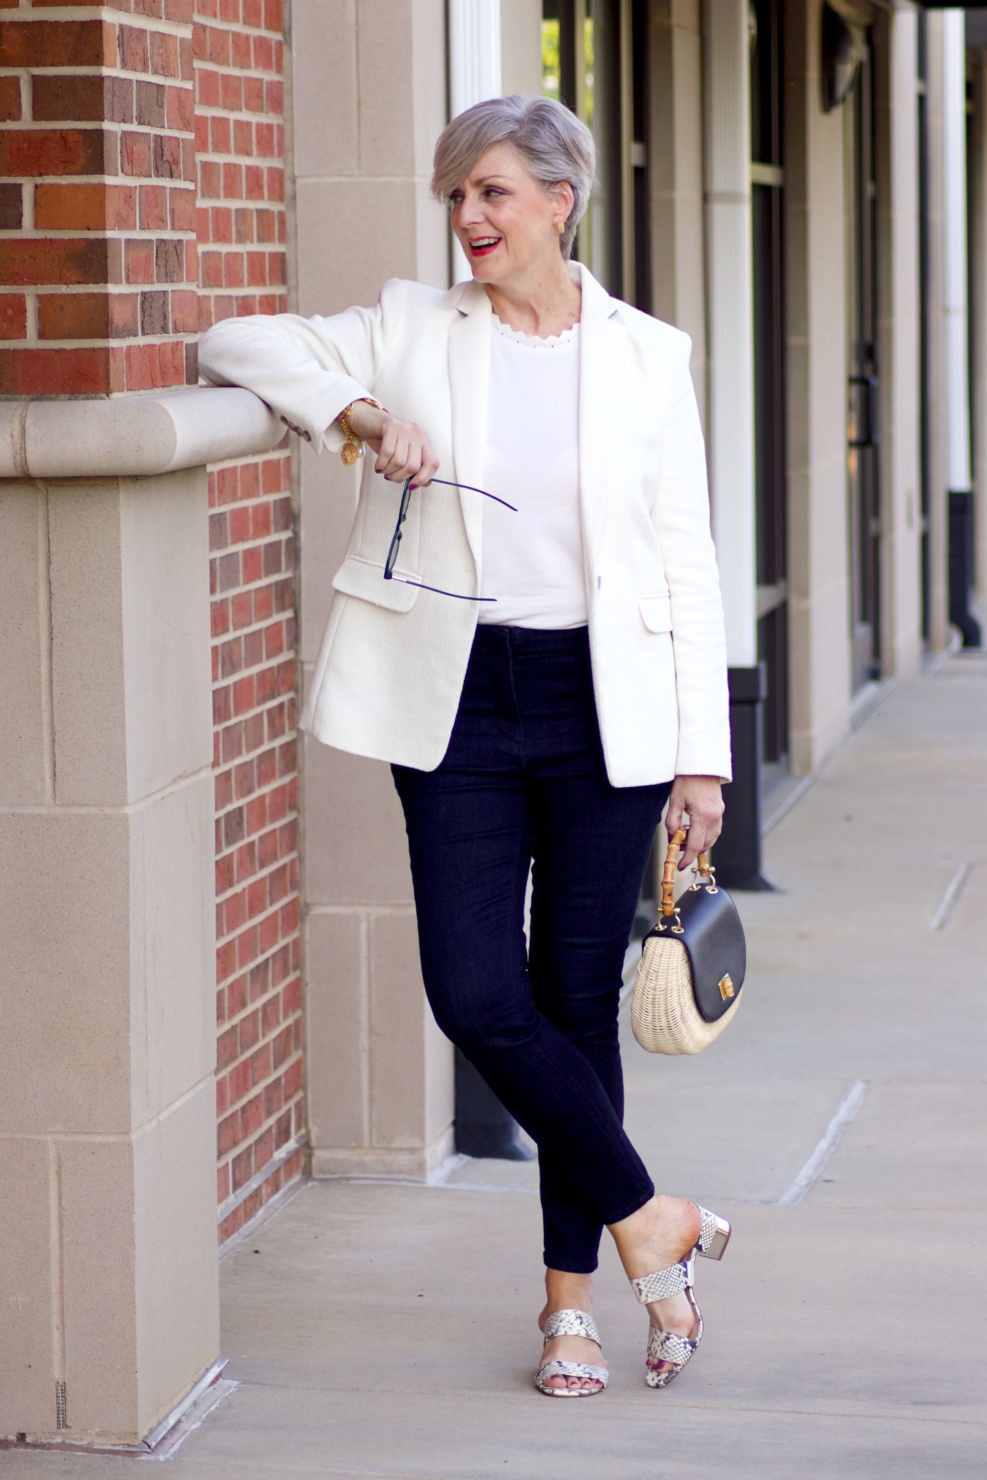 beth from Style at a Certain Age wears a textured ivory blazer, ivory scalloped shell, dark rinse skinny jeans, snakeskin sandals and wicker handbag